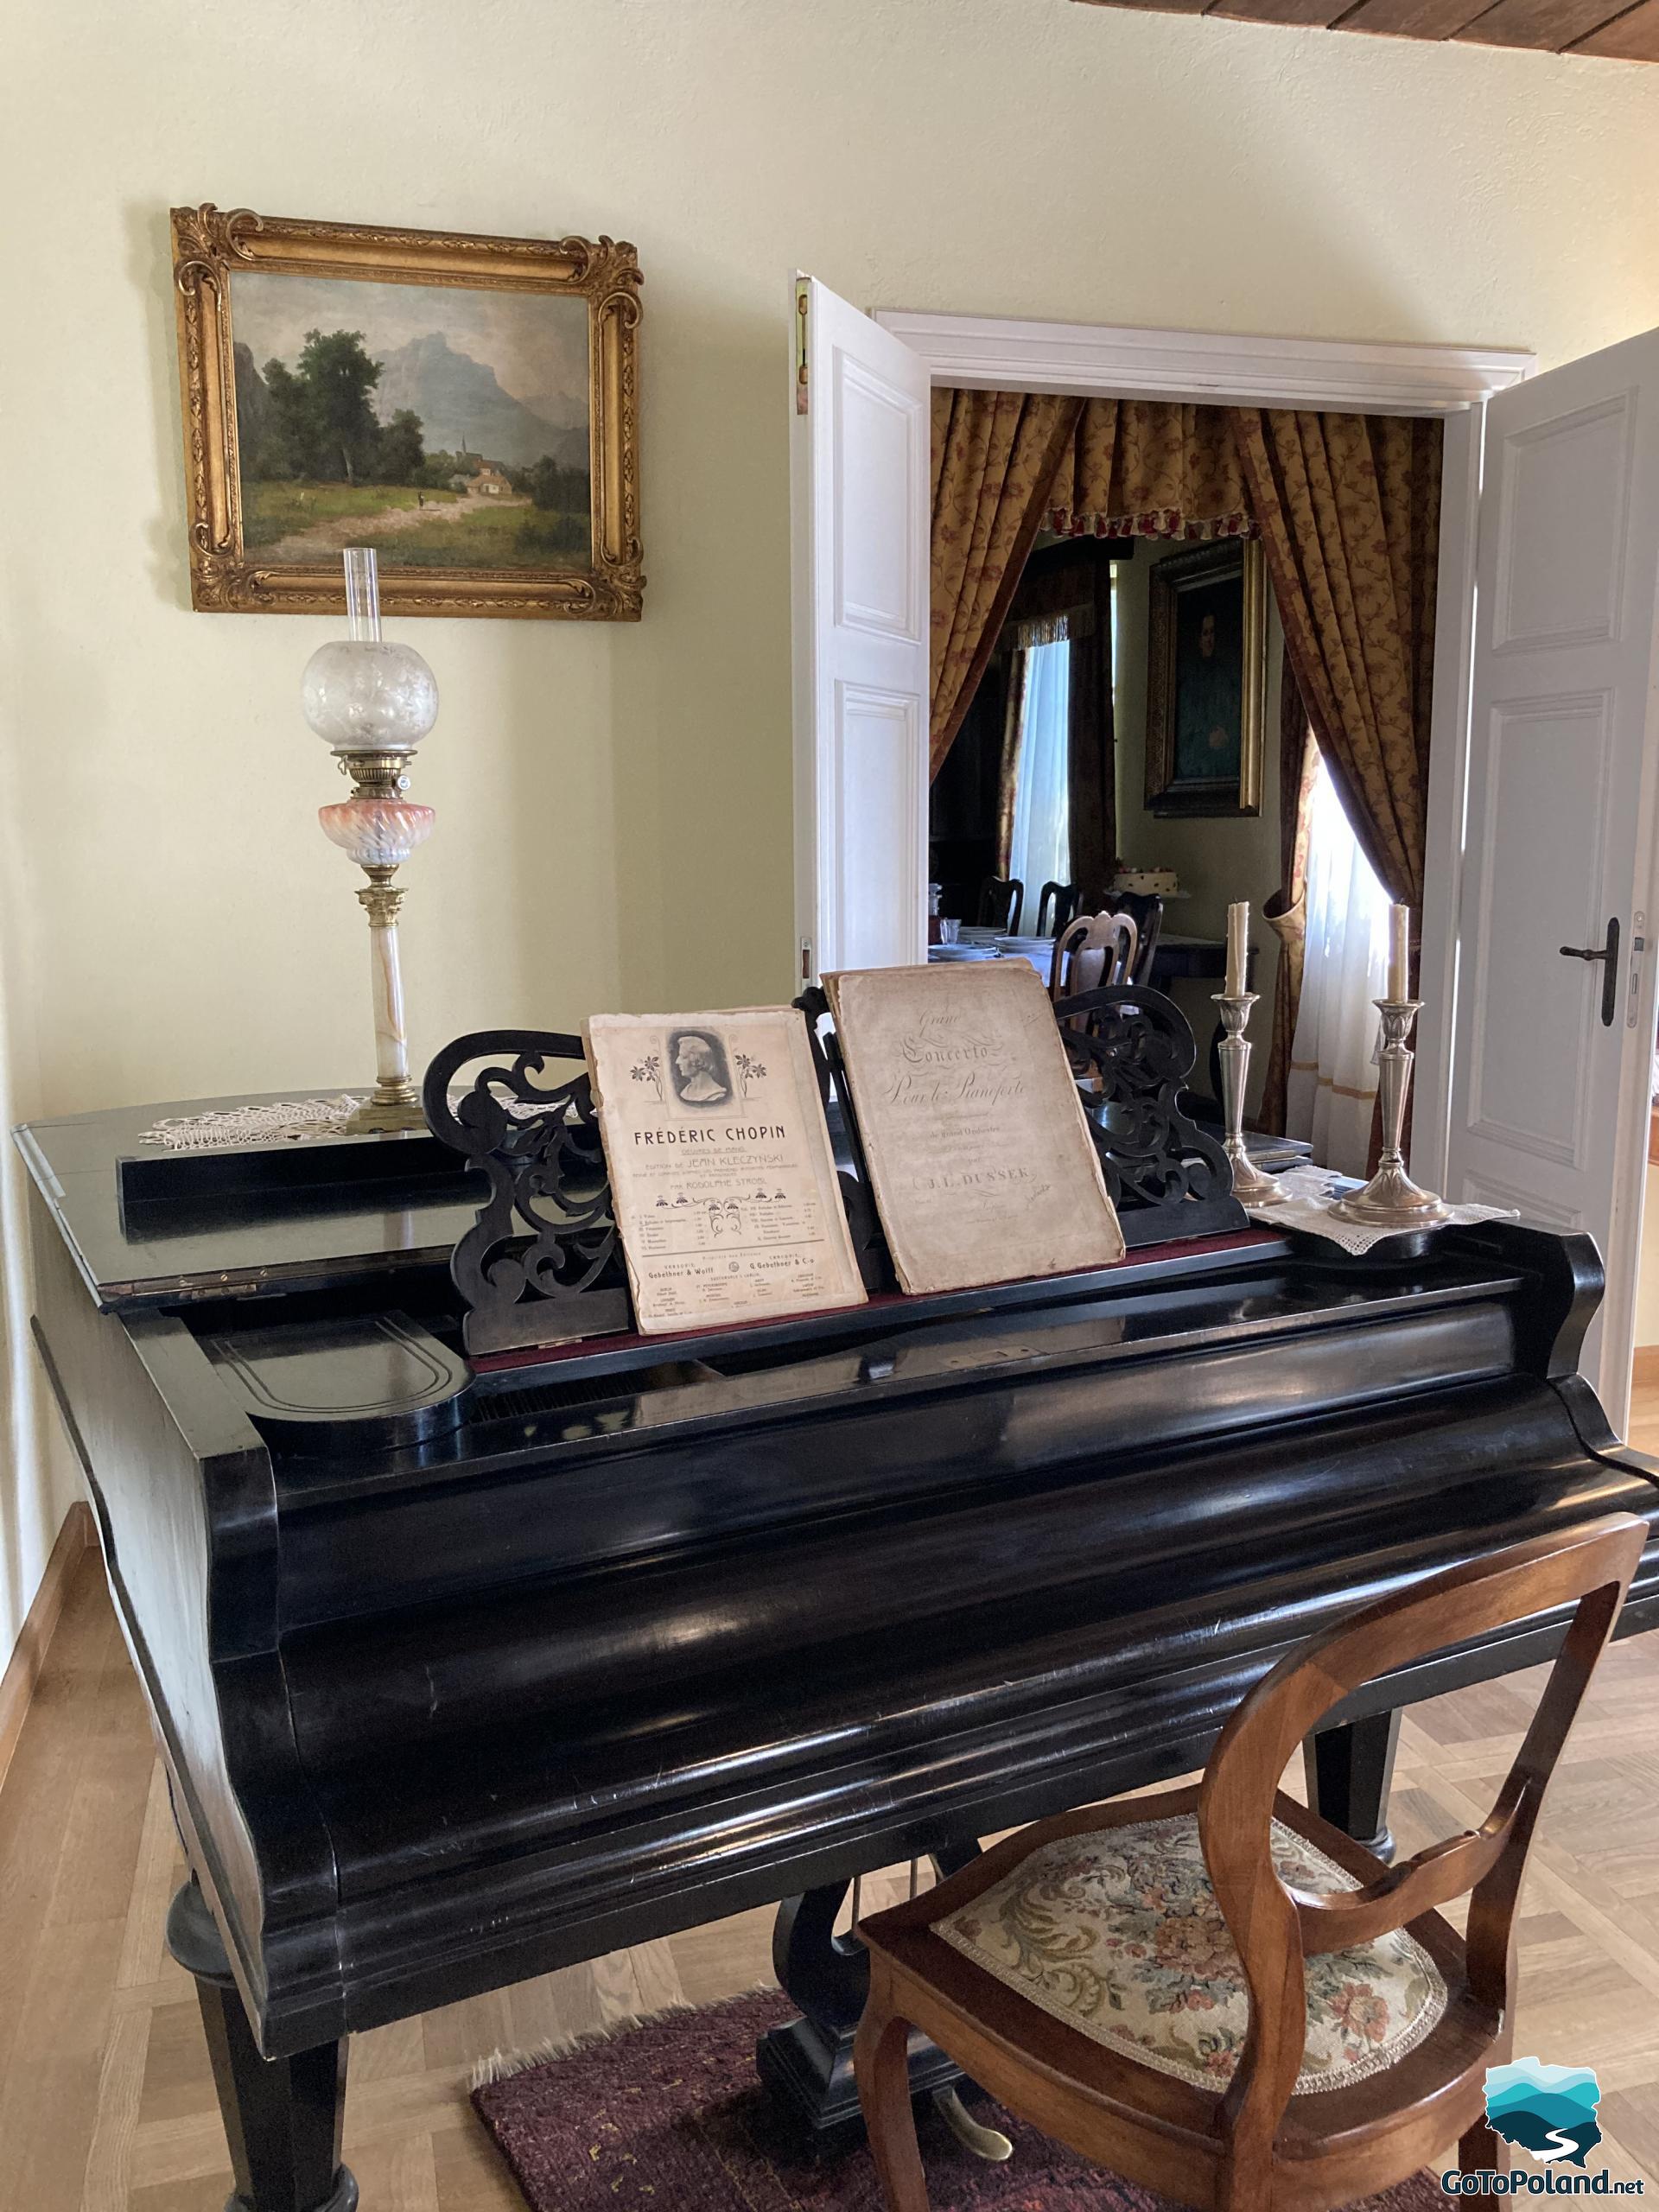 a black piano stands inside the manor, on the piano there is a Chopins piece